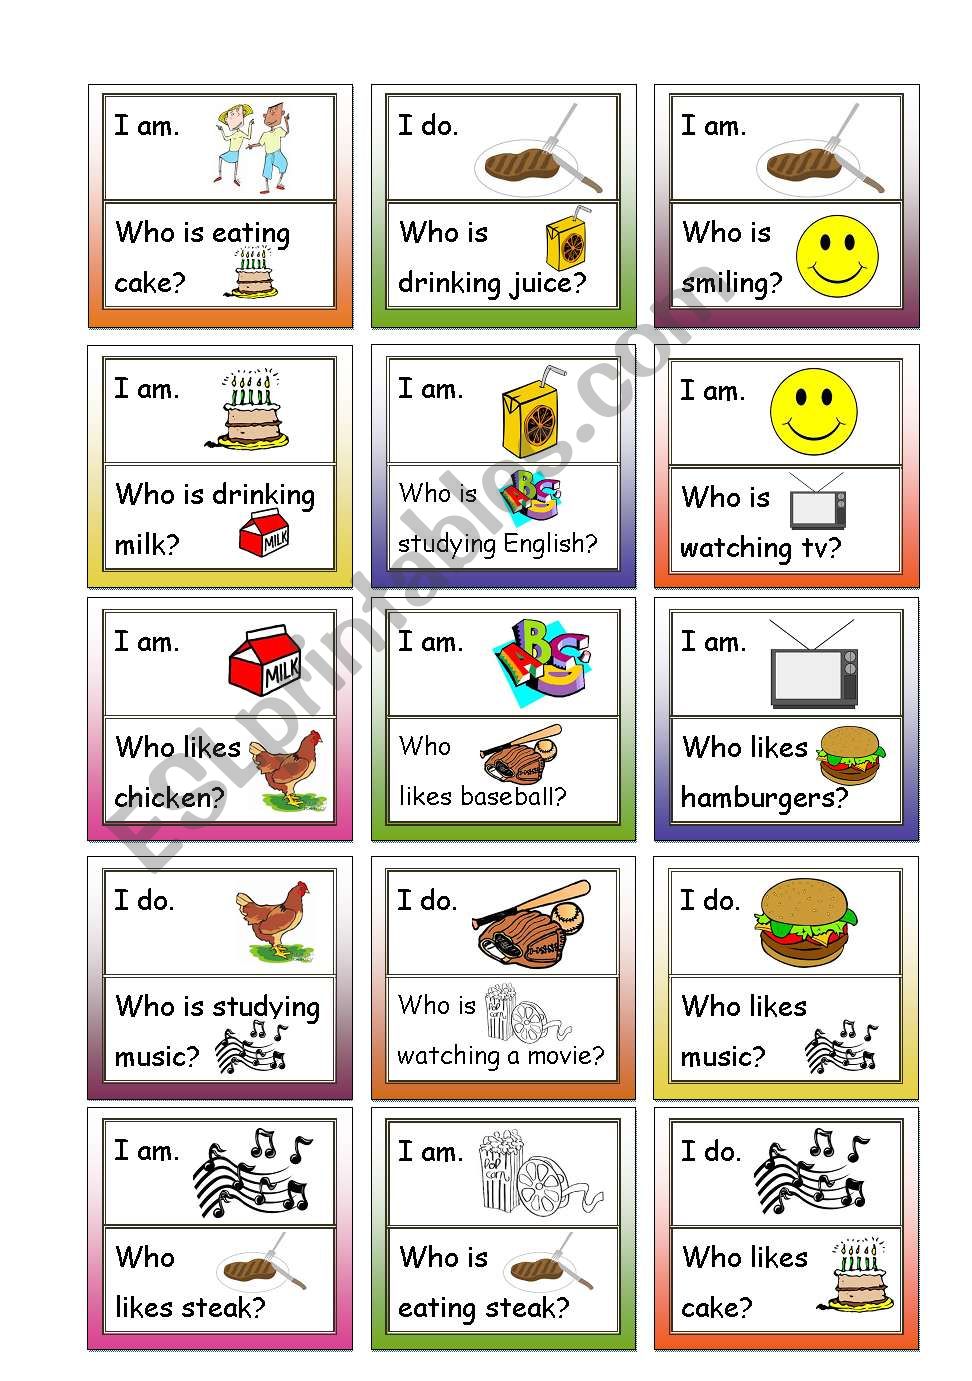 LOOP GAME! Fun speaking activity, 24 cards, for Beginners, B4 paper, practice reading and listening to questions and answers